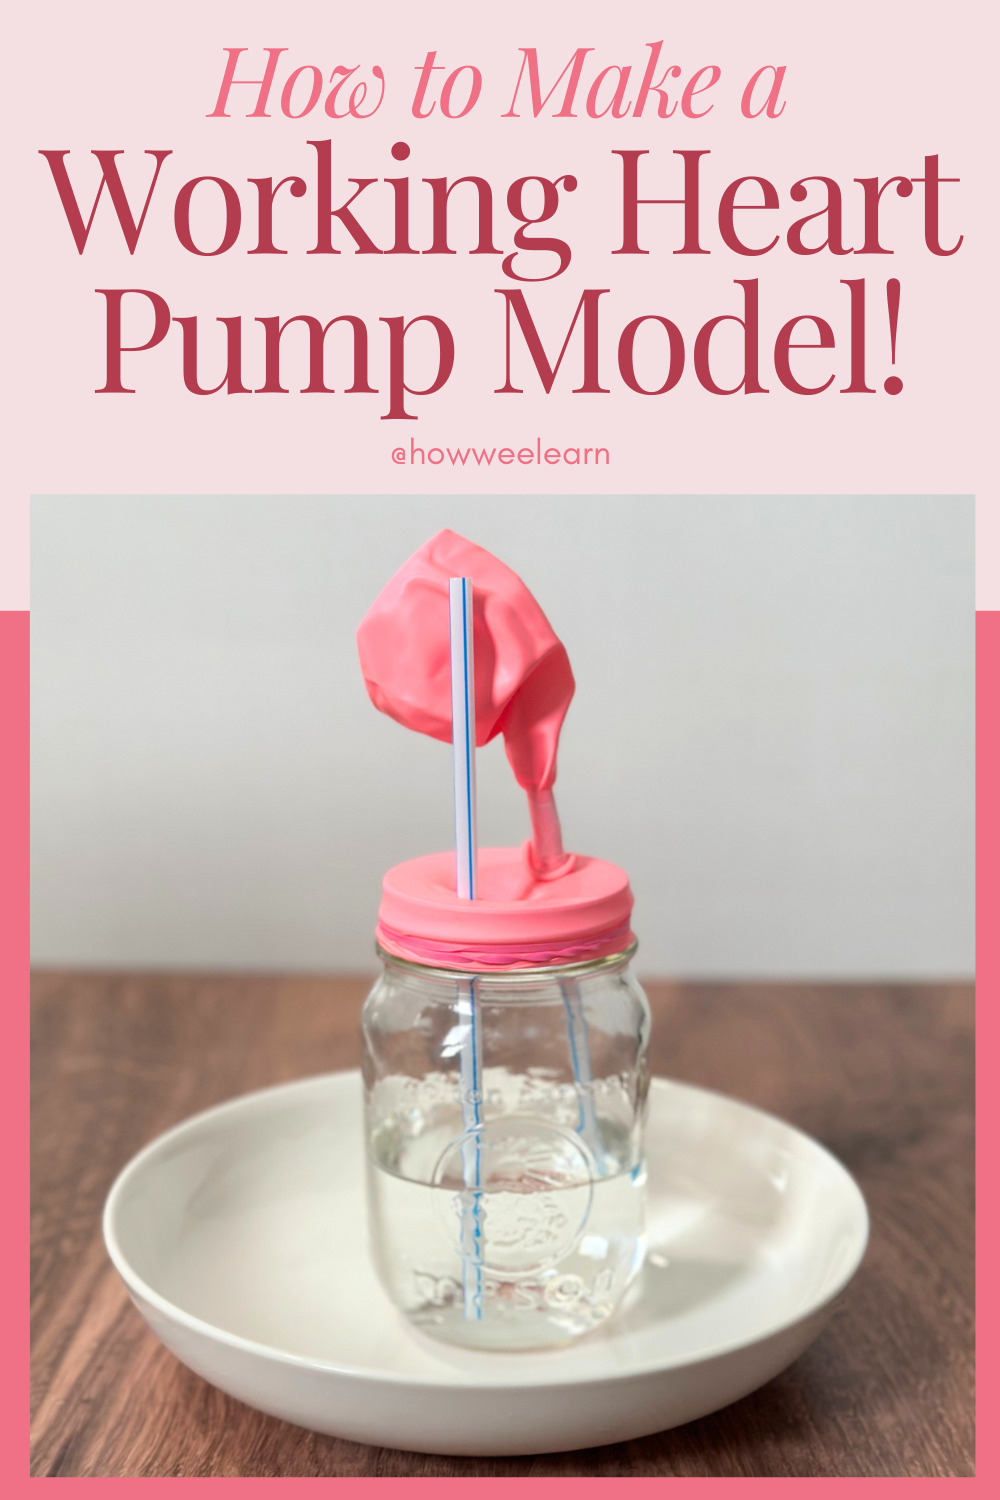 How to Make a Working Heart Pump Model